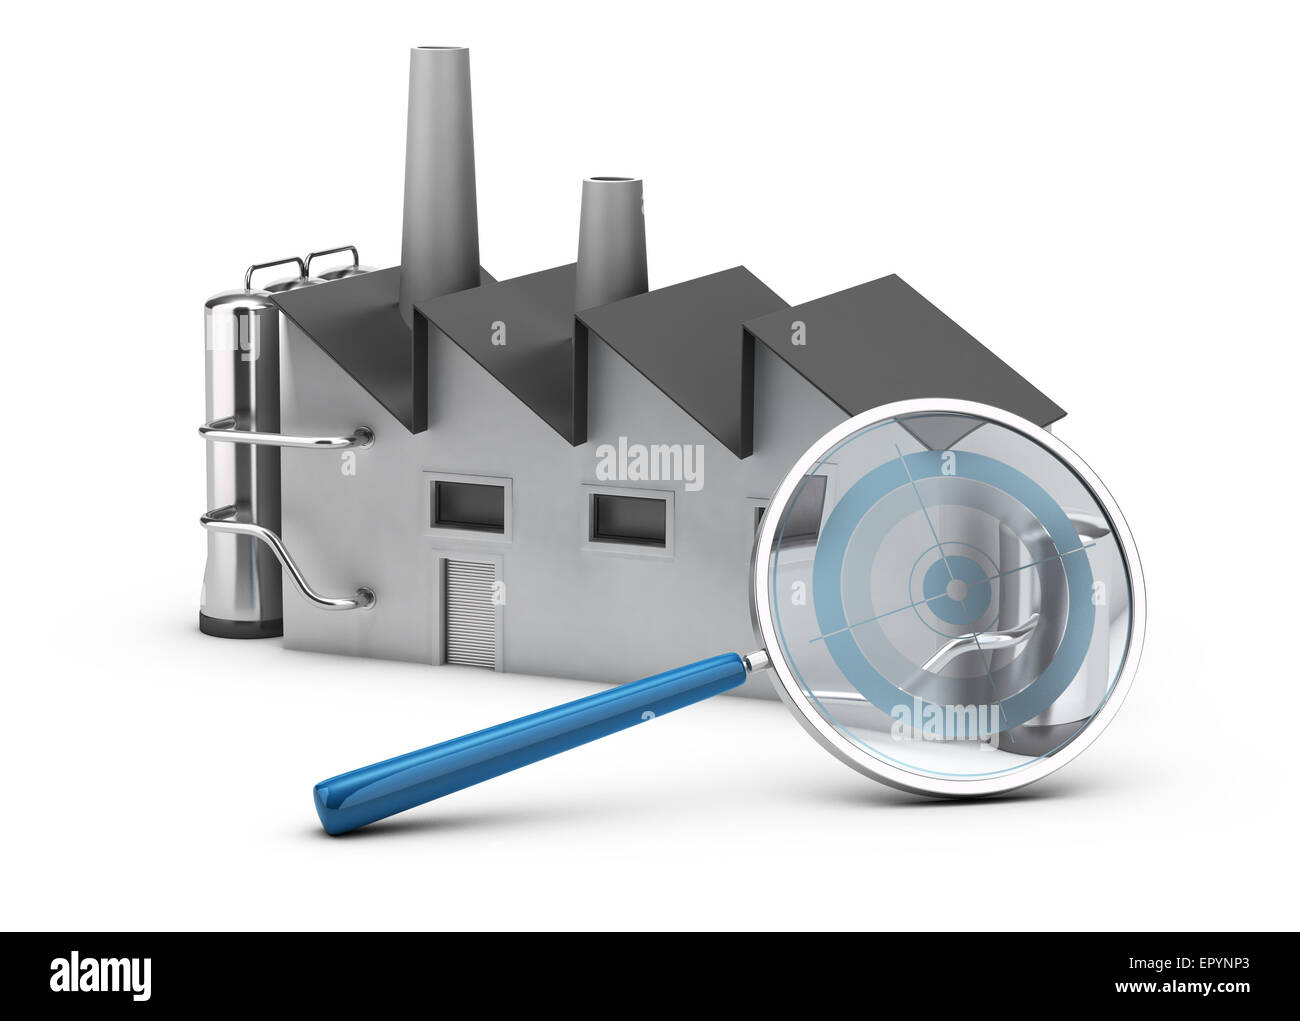 Illustration of benchmarking. 3D render of a factory and a magnifier with a target inside. Image over white background. Stock Photo